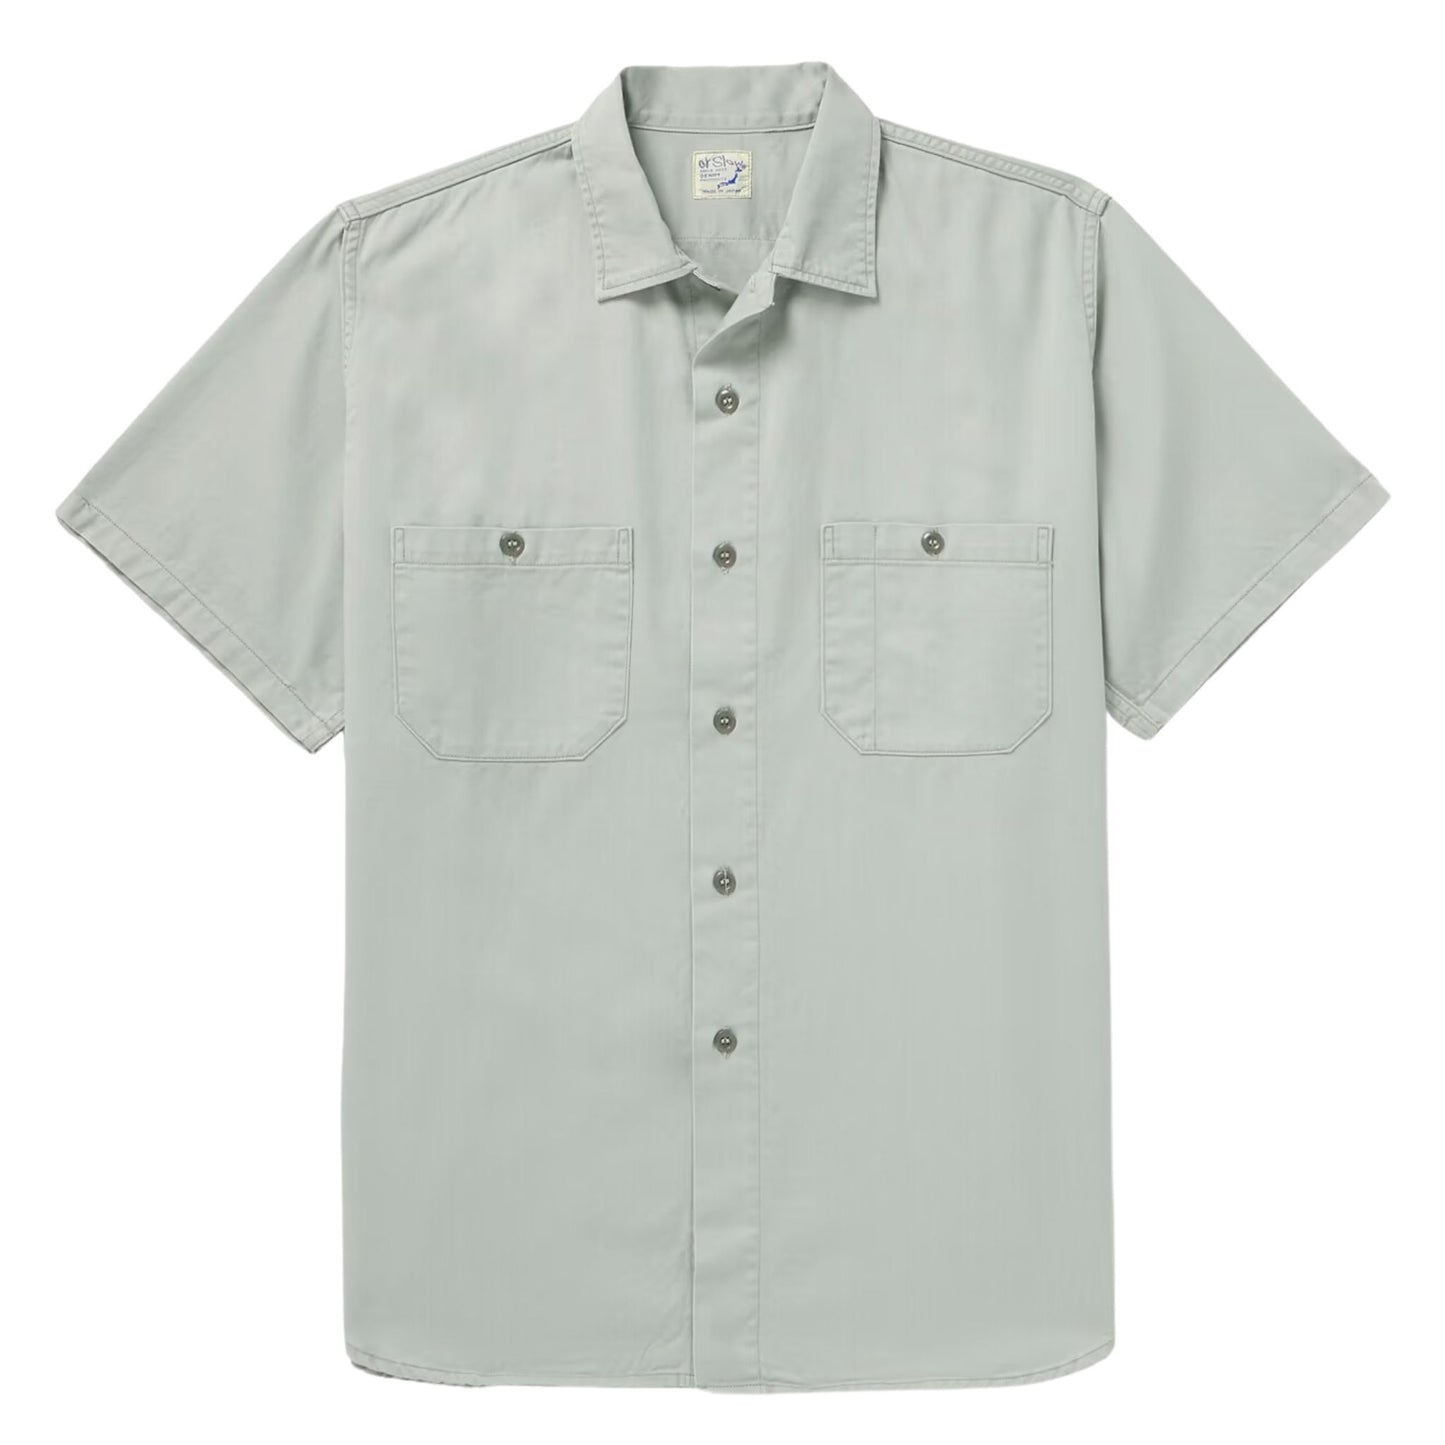 ORSLOW - Cotton Twill 60's Work Shirt